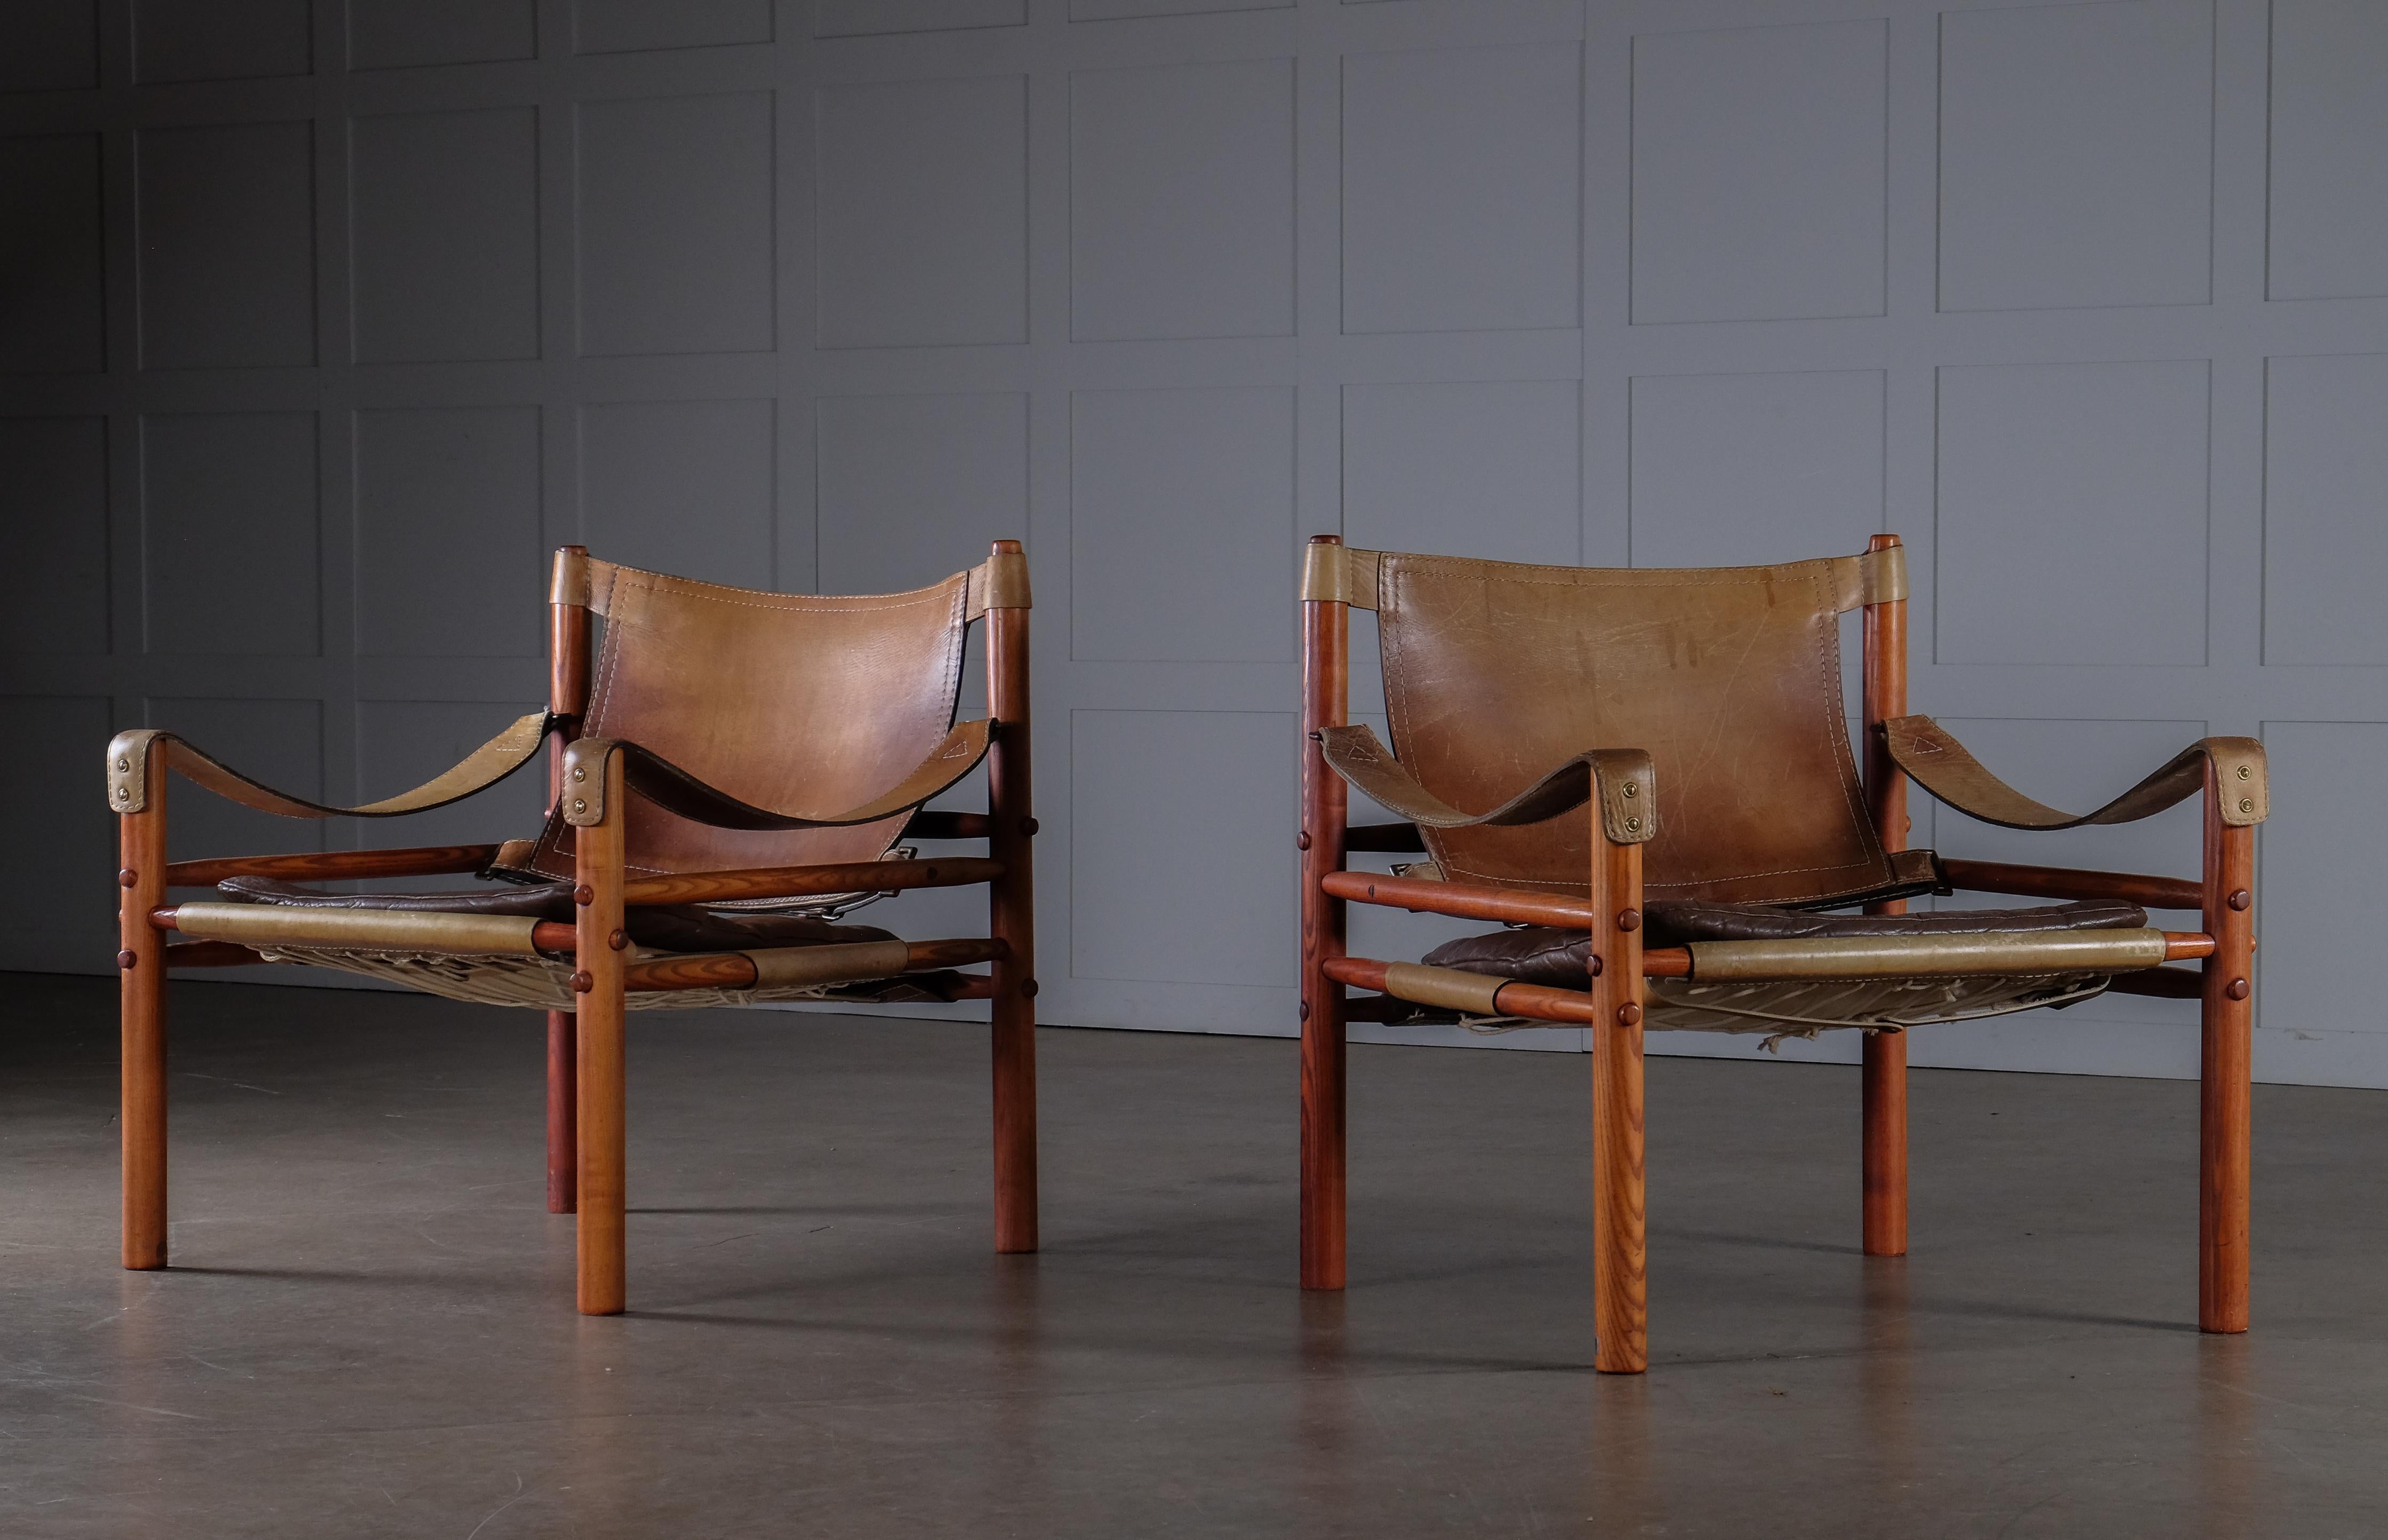 Pair of safari chairs model Sirocco in good condition with original leather.
Designed by Arne Norell, produced by Arne Norell AB in Aneby, Sweden, 1970s.



